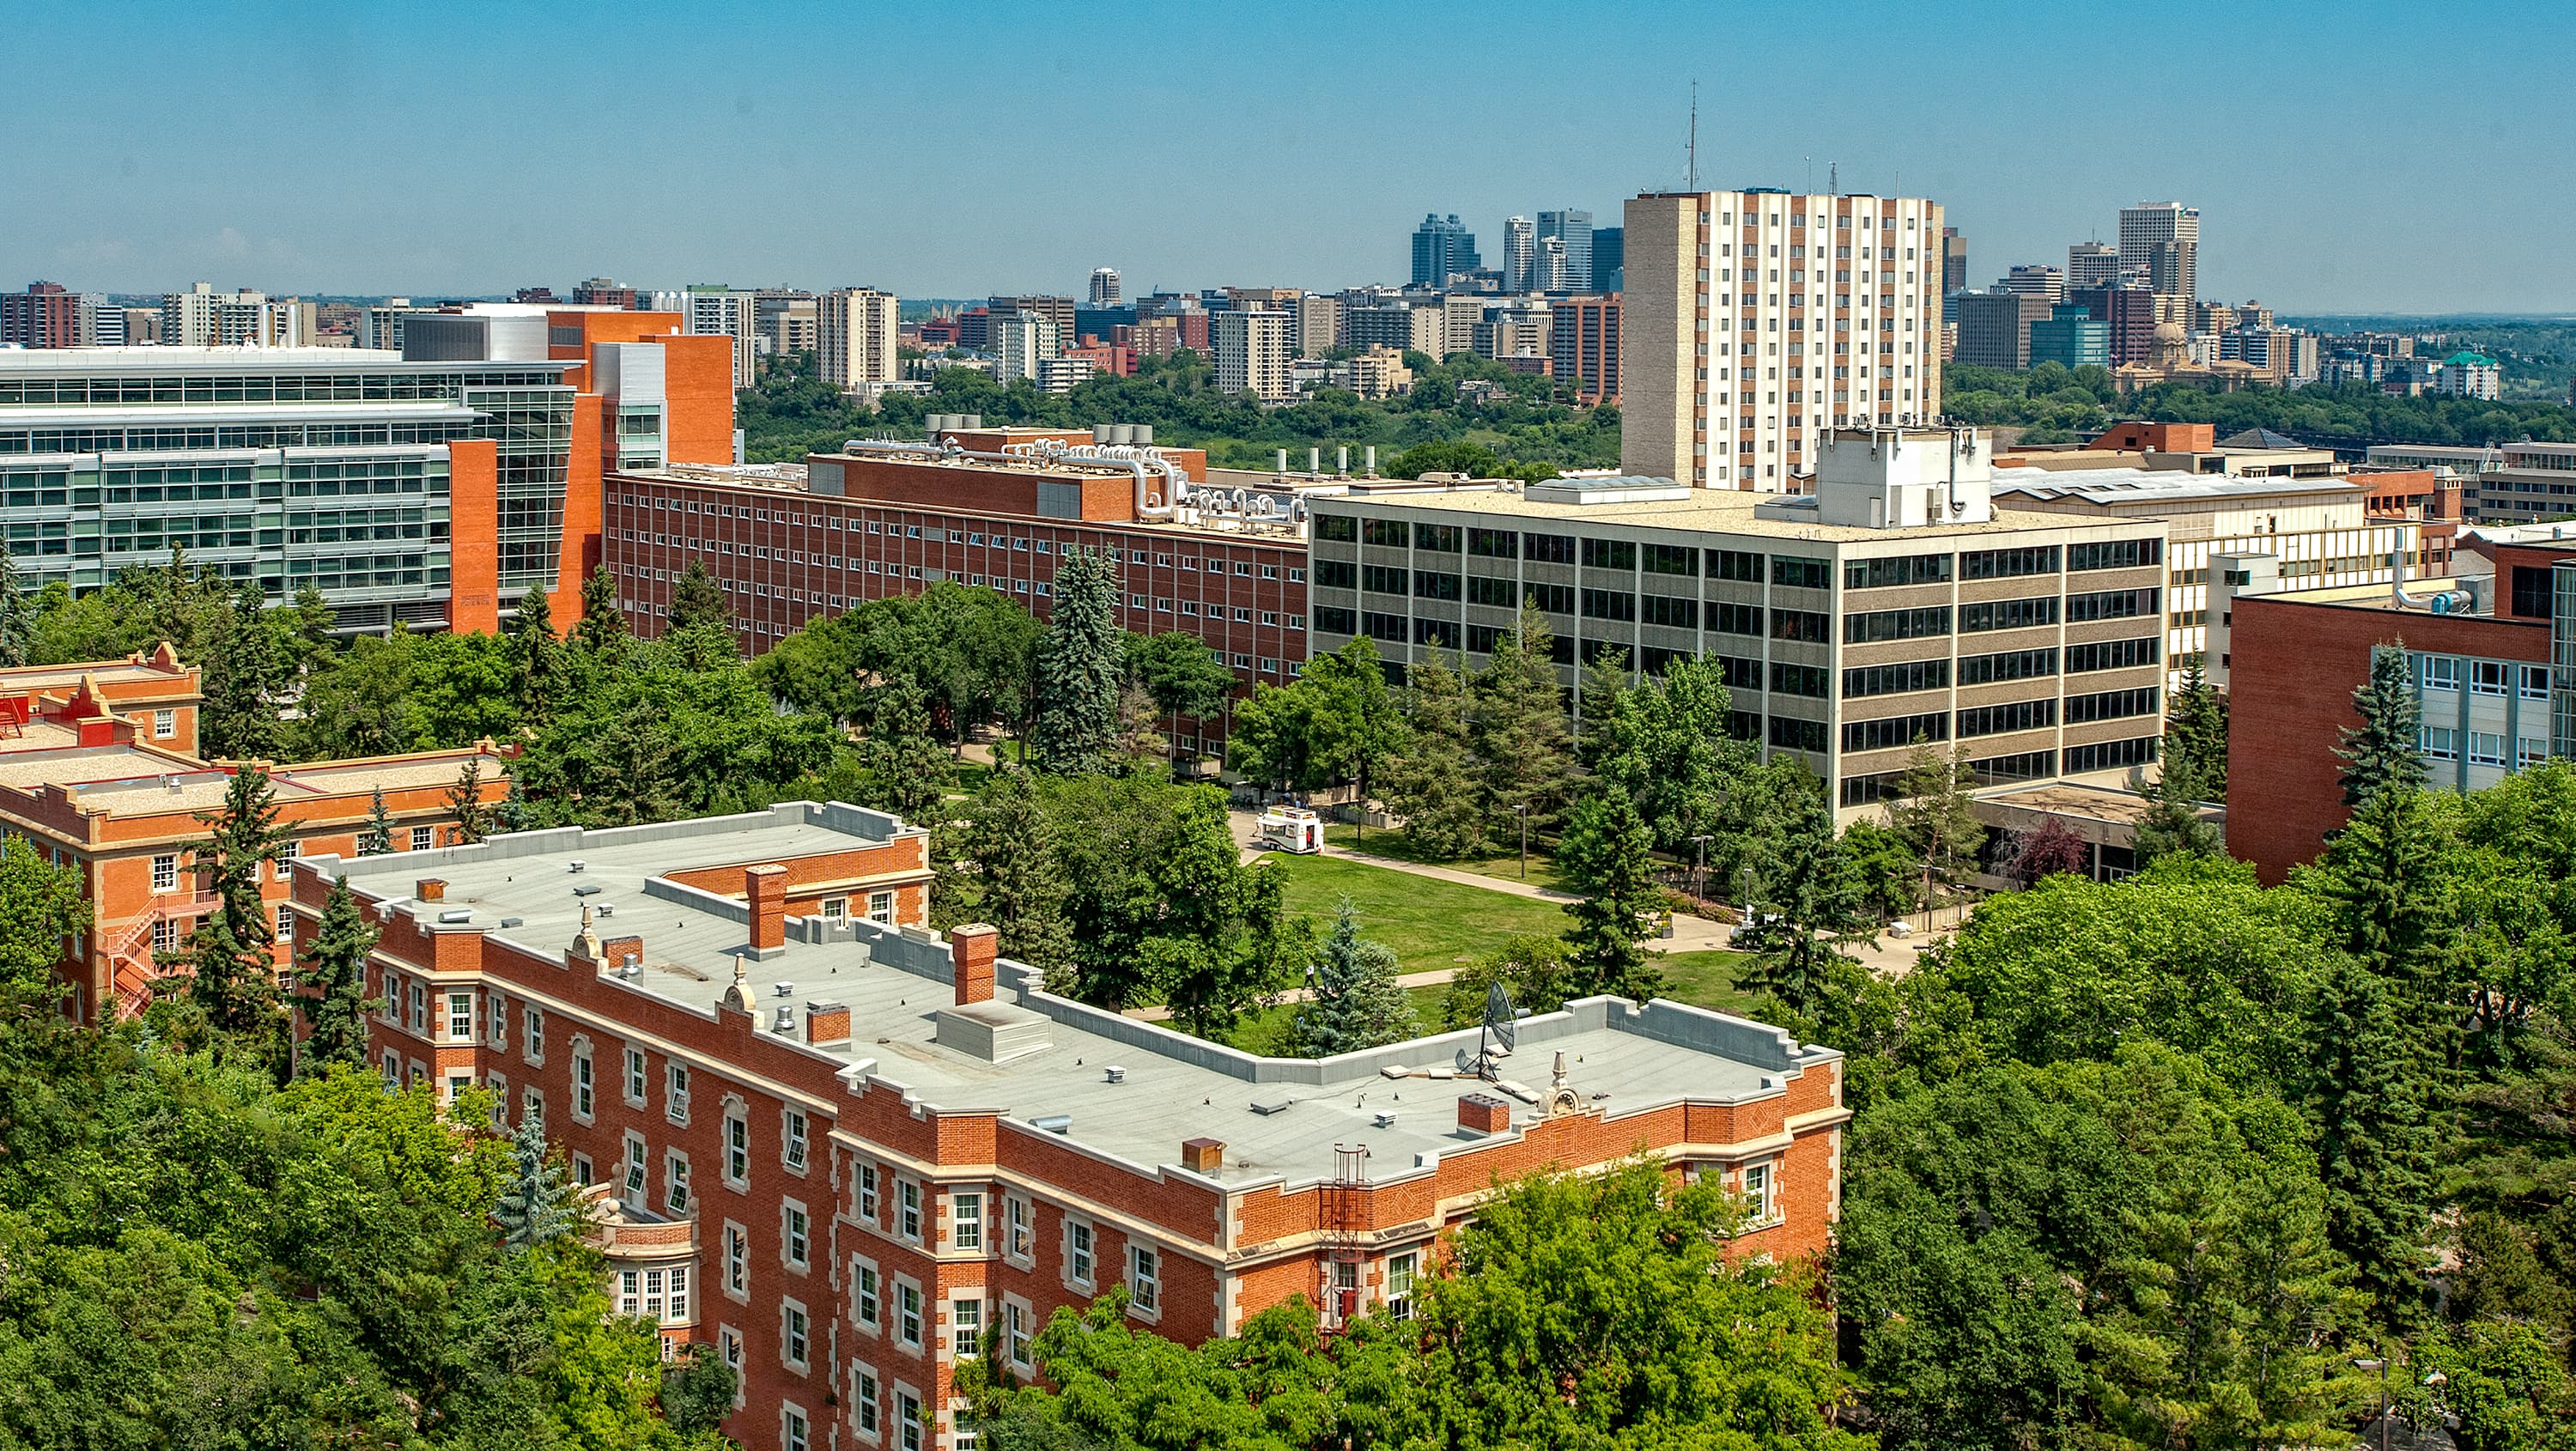 Aerial shot of the University of Alberta's North Campus with downtown Edmonton in the background (photographed by Richard Siemens)